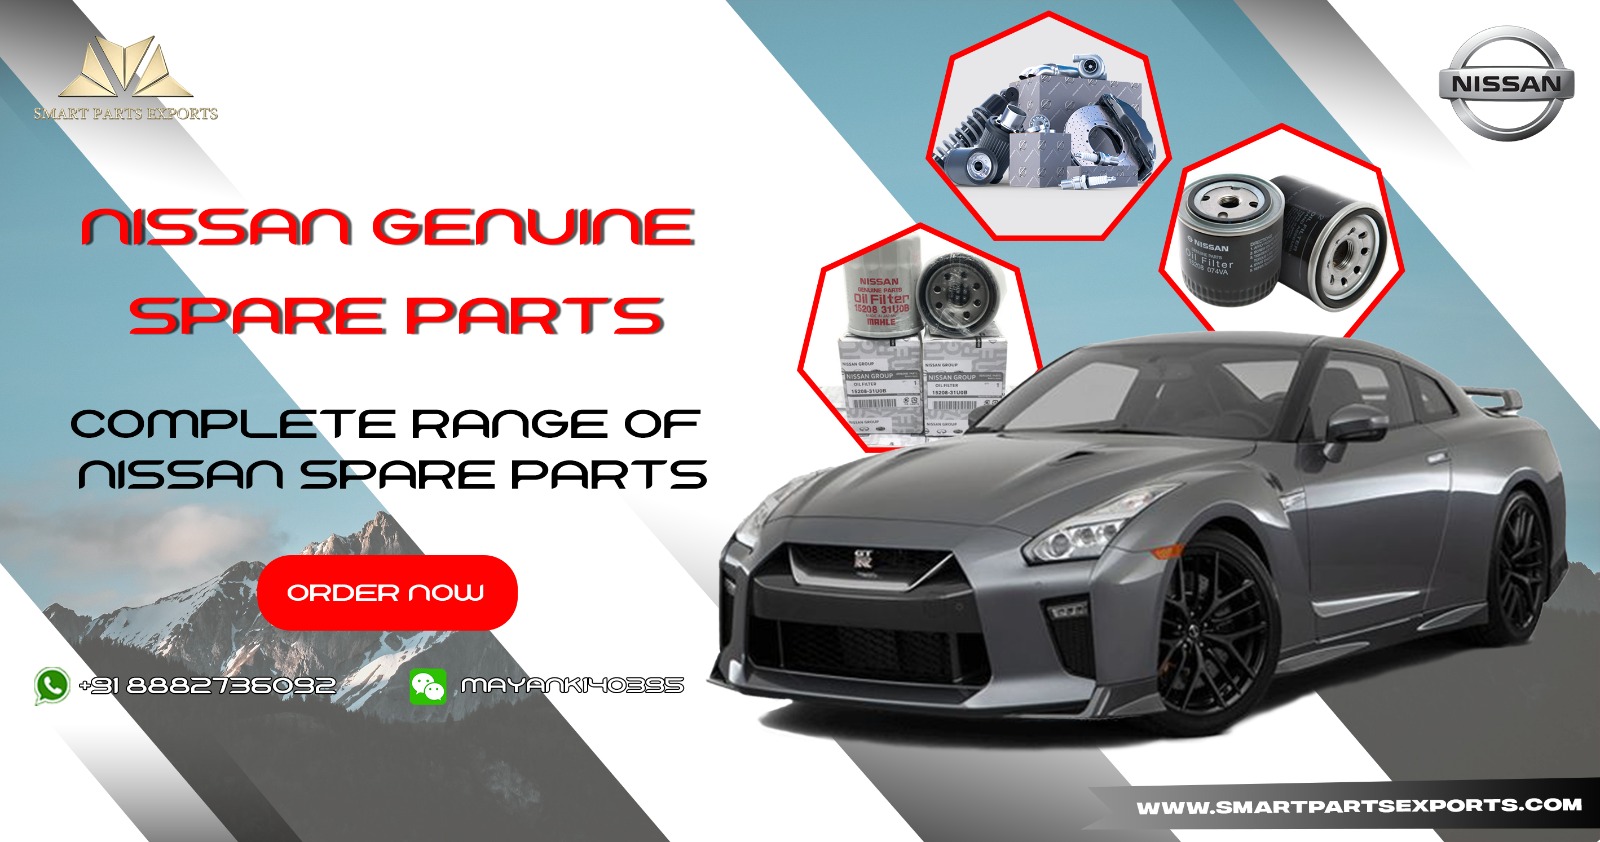 Buy Nissan spare parts From smart Parts exports